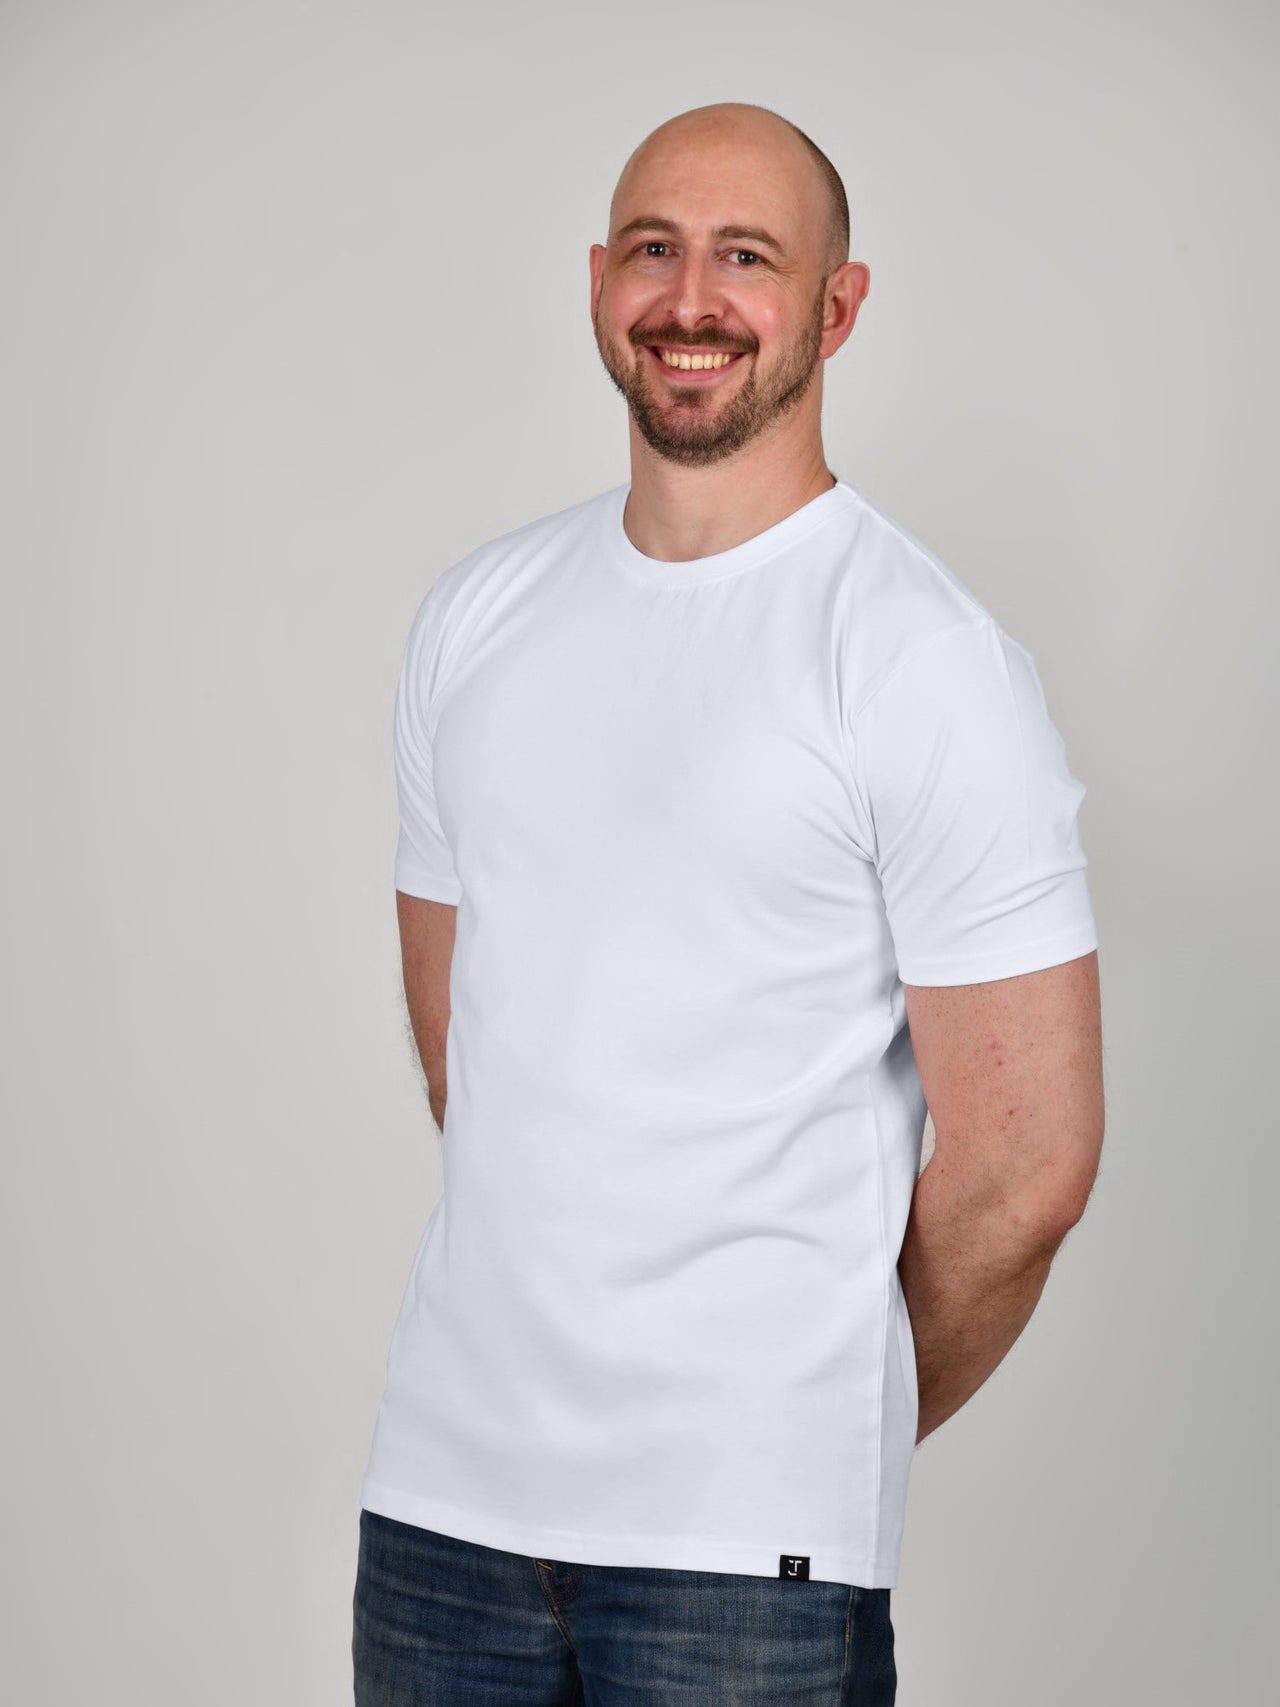 A tall and slim guy in the studio, hands behind back and wearing a white XL tall slim fit t-shirt.